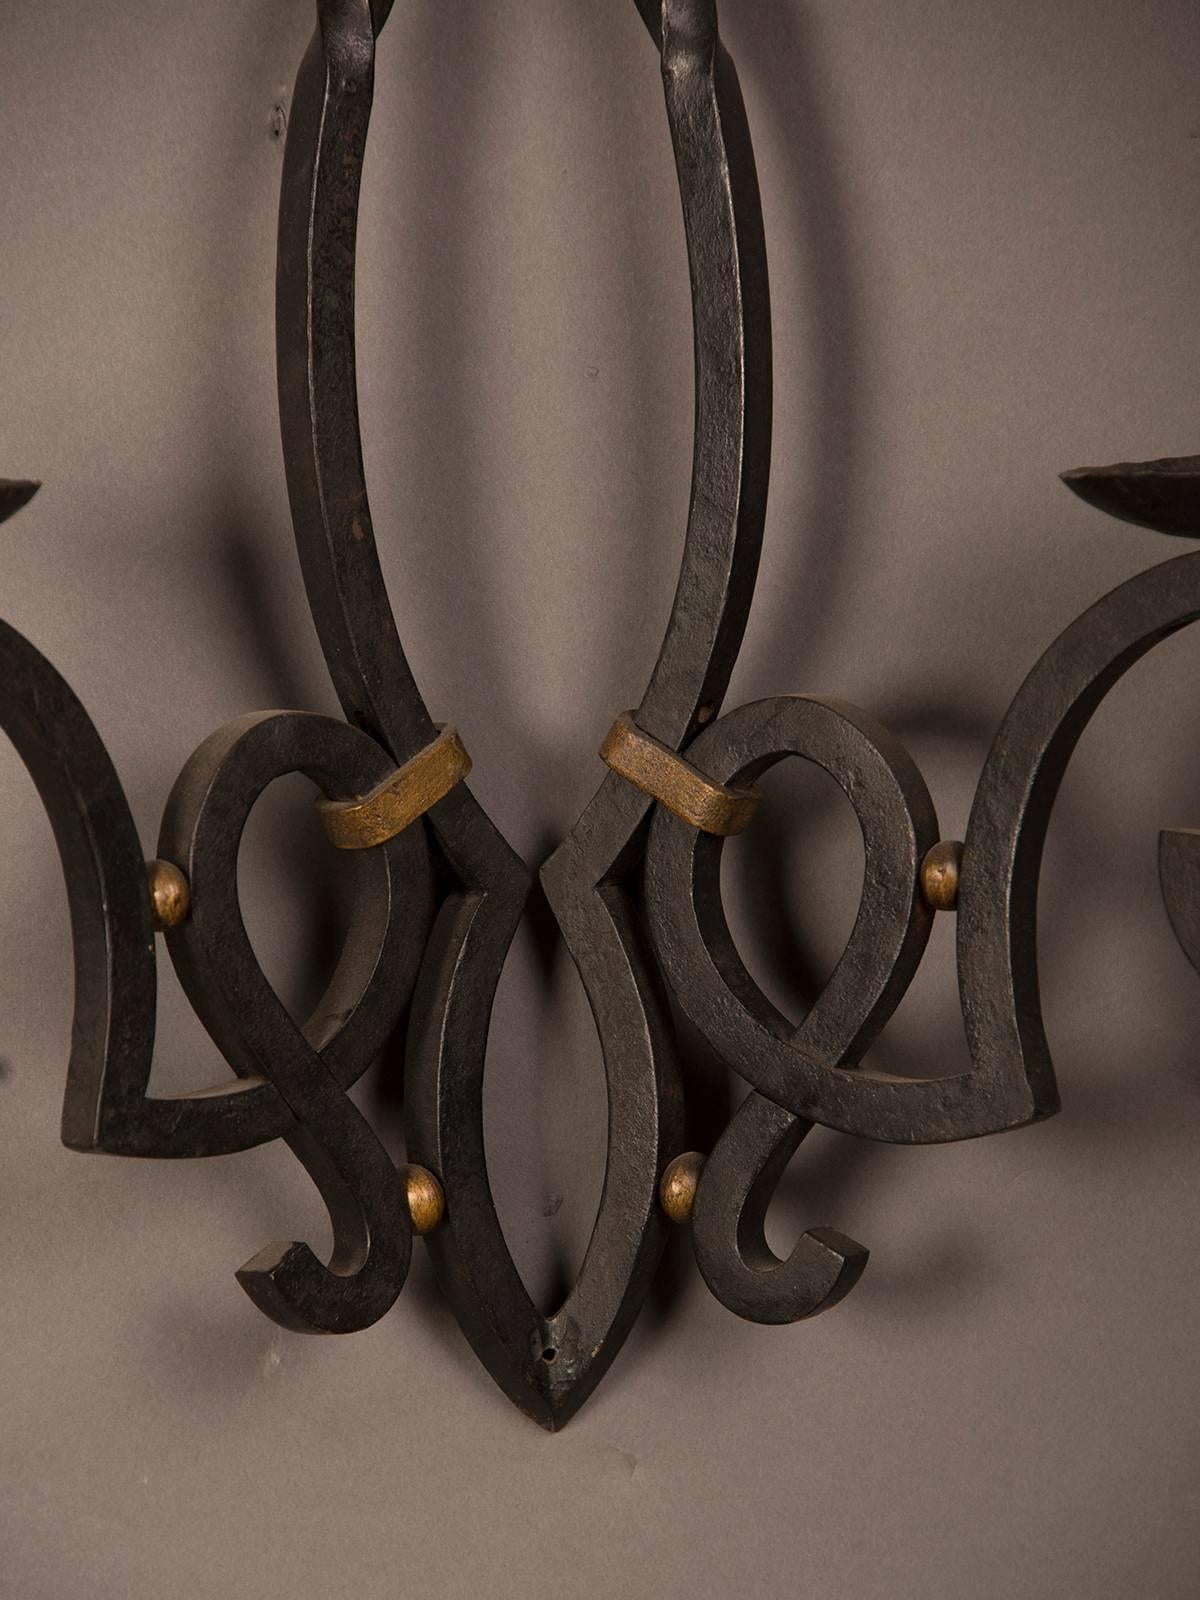 Massive Vintage French Iron Two Candle Arm Sconce from France, circa 1940 In Excellent Condition For Sale In Houston, TX